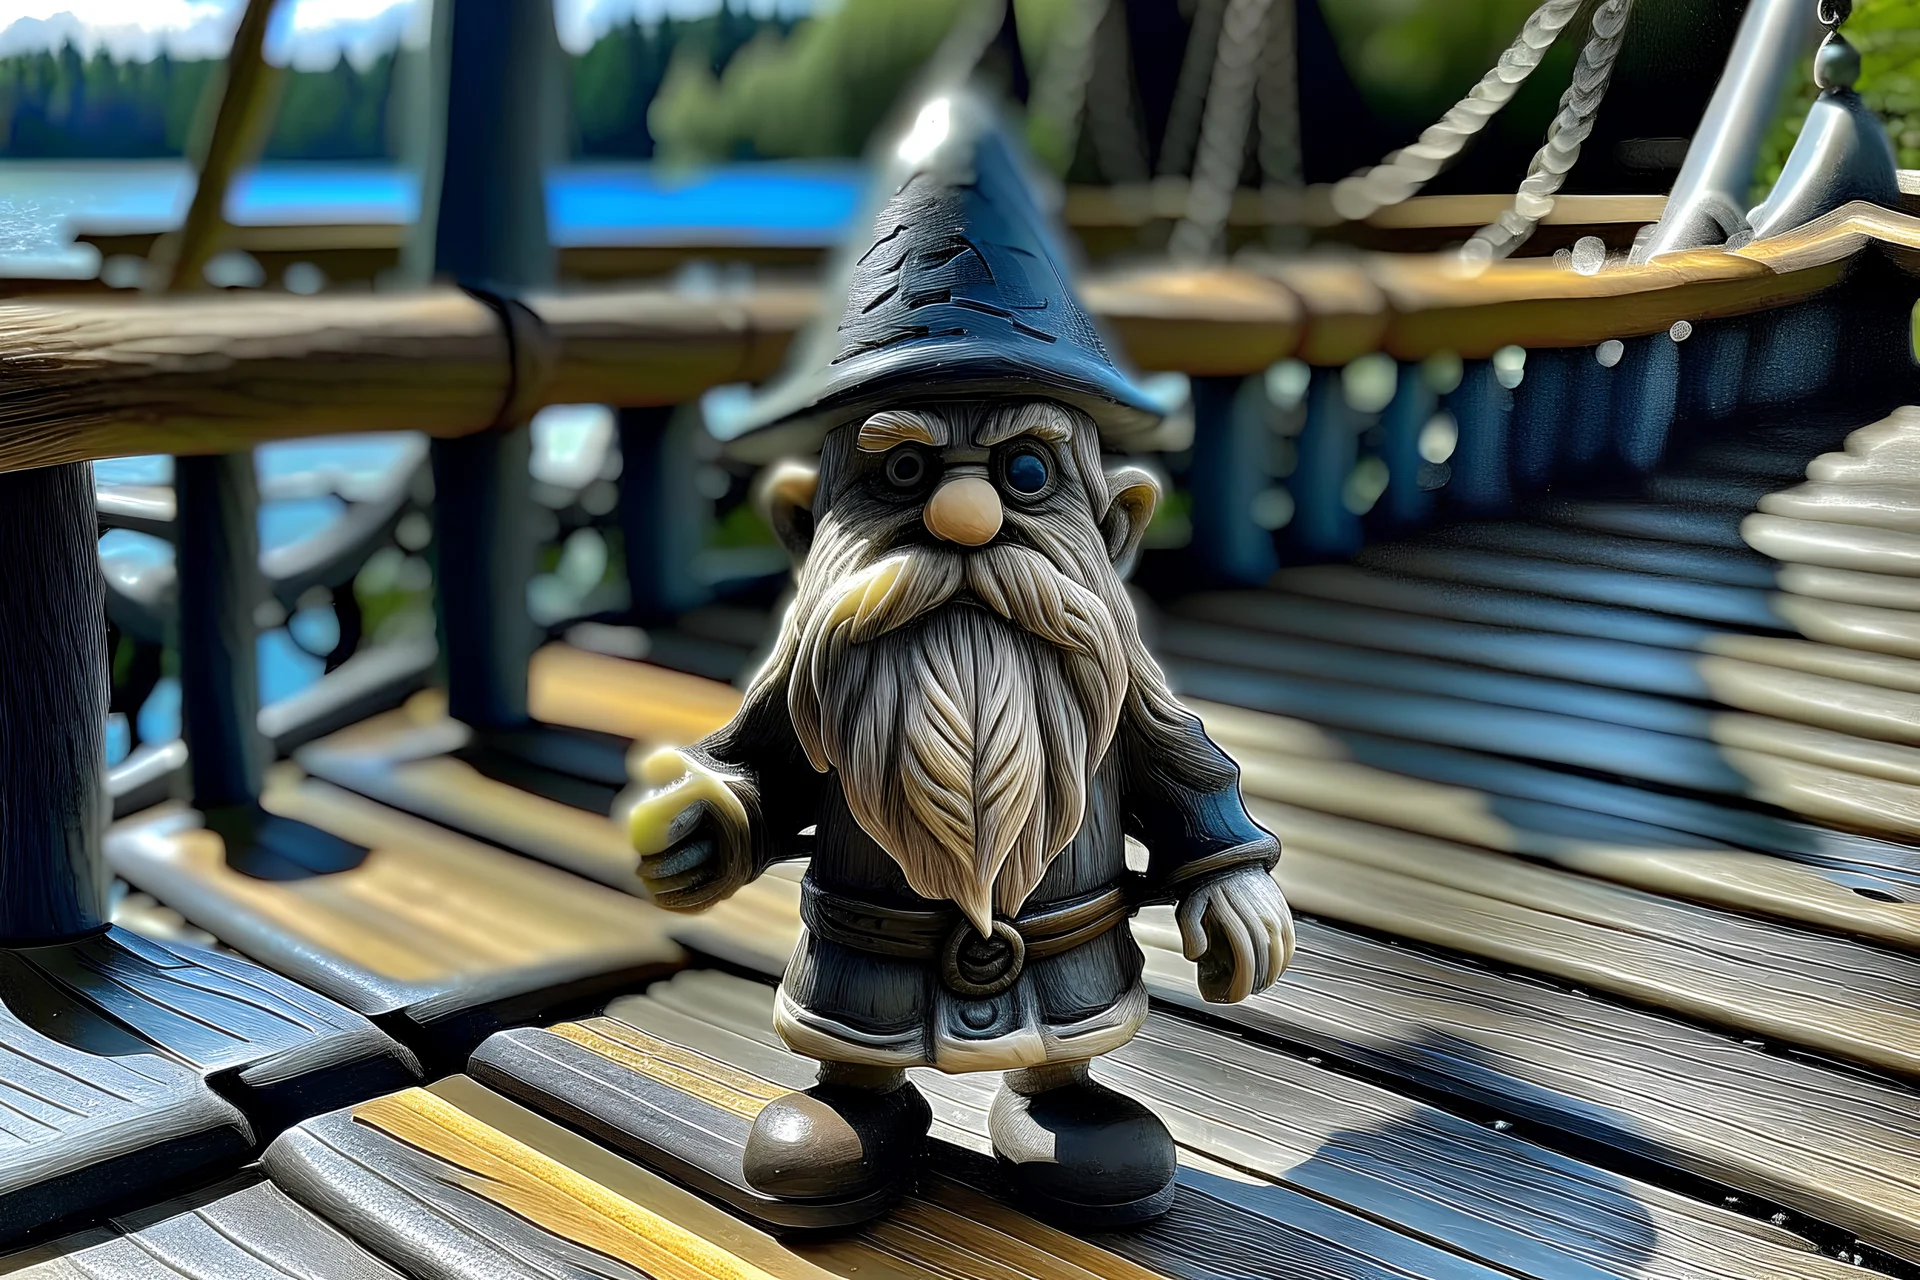 a klabautermann with gnomish features, looks like a ghost. standing on the deck of a boat